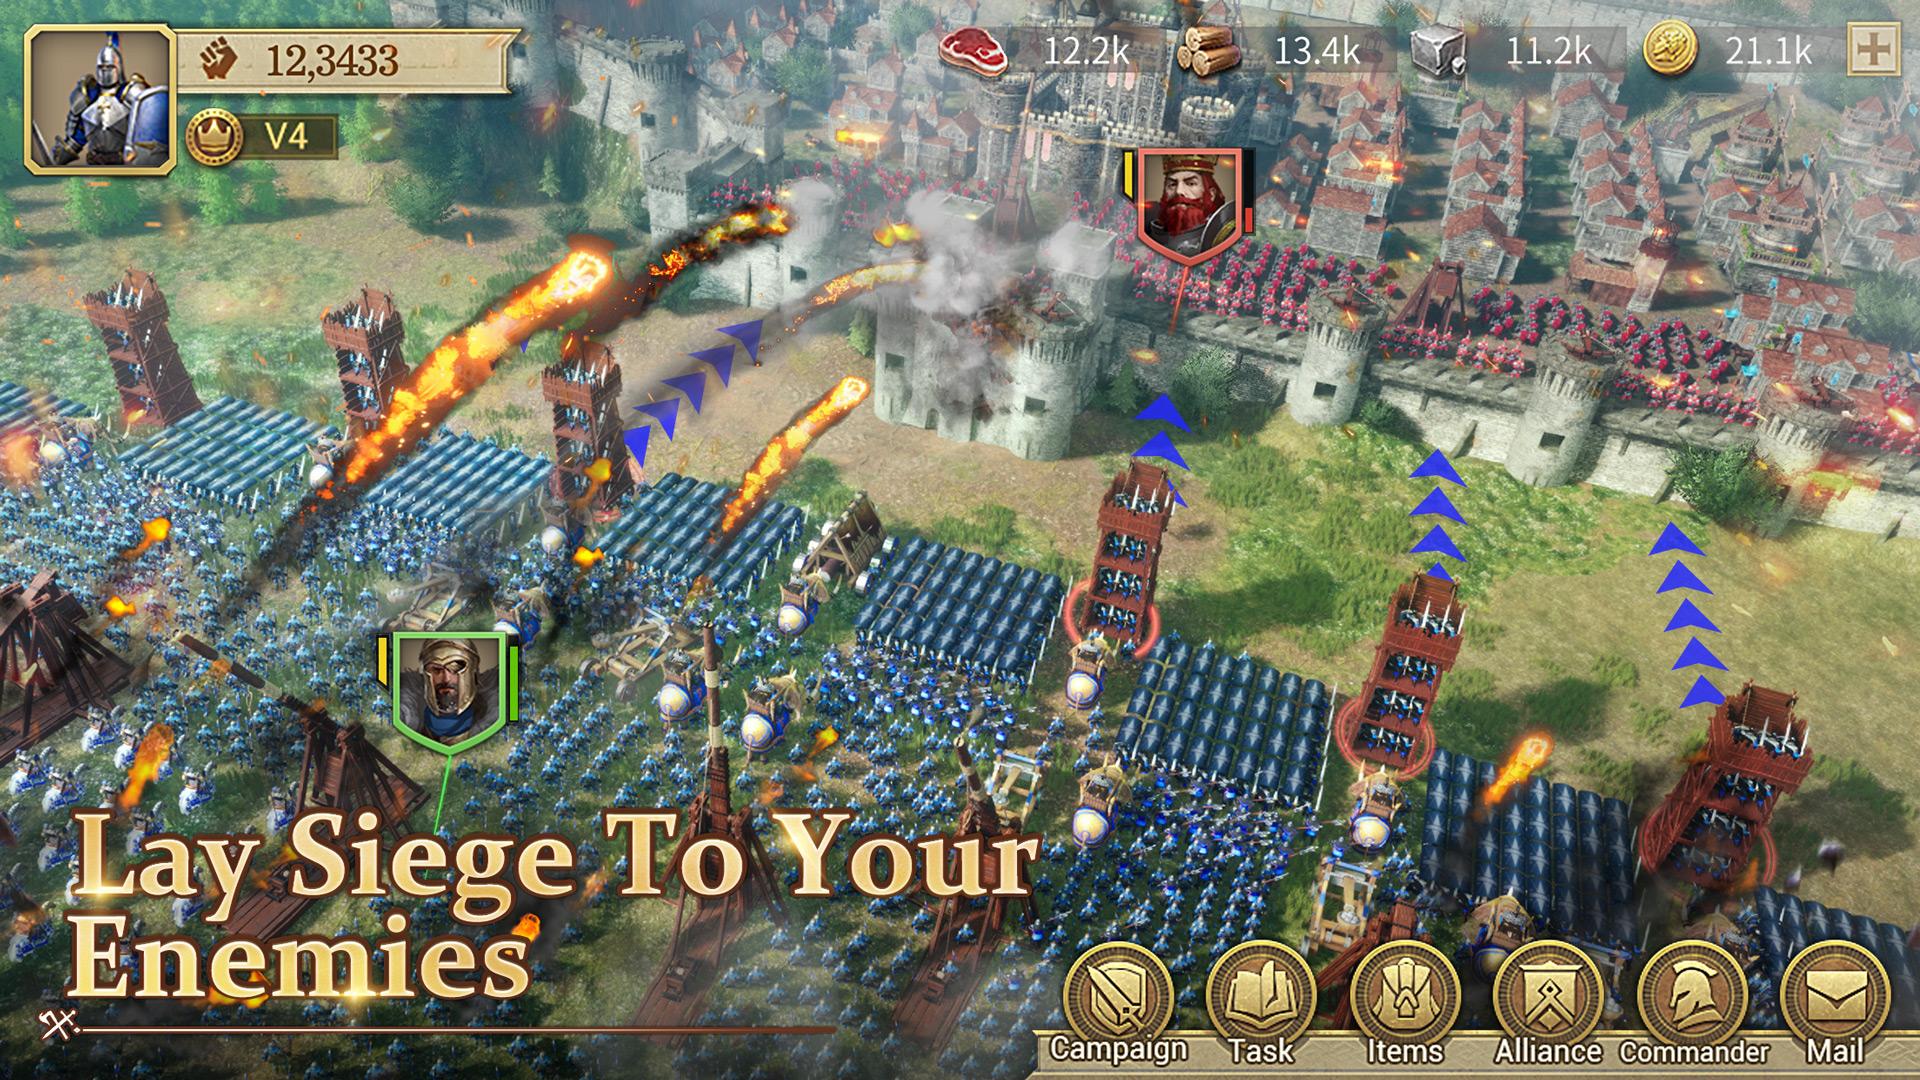 Gladiator arena idle tycoon. Gladiator Arena Idle Tycoon Mod. Joining in Wars.